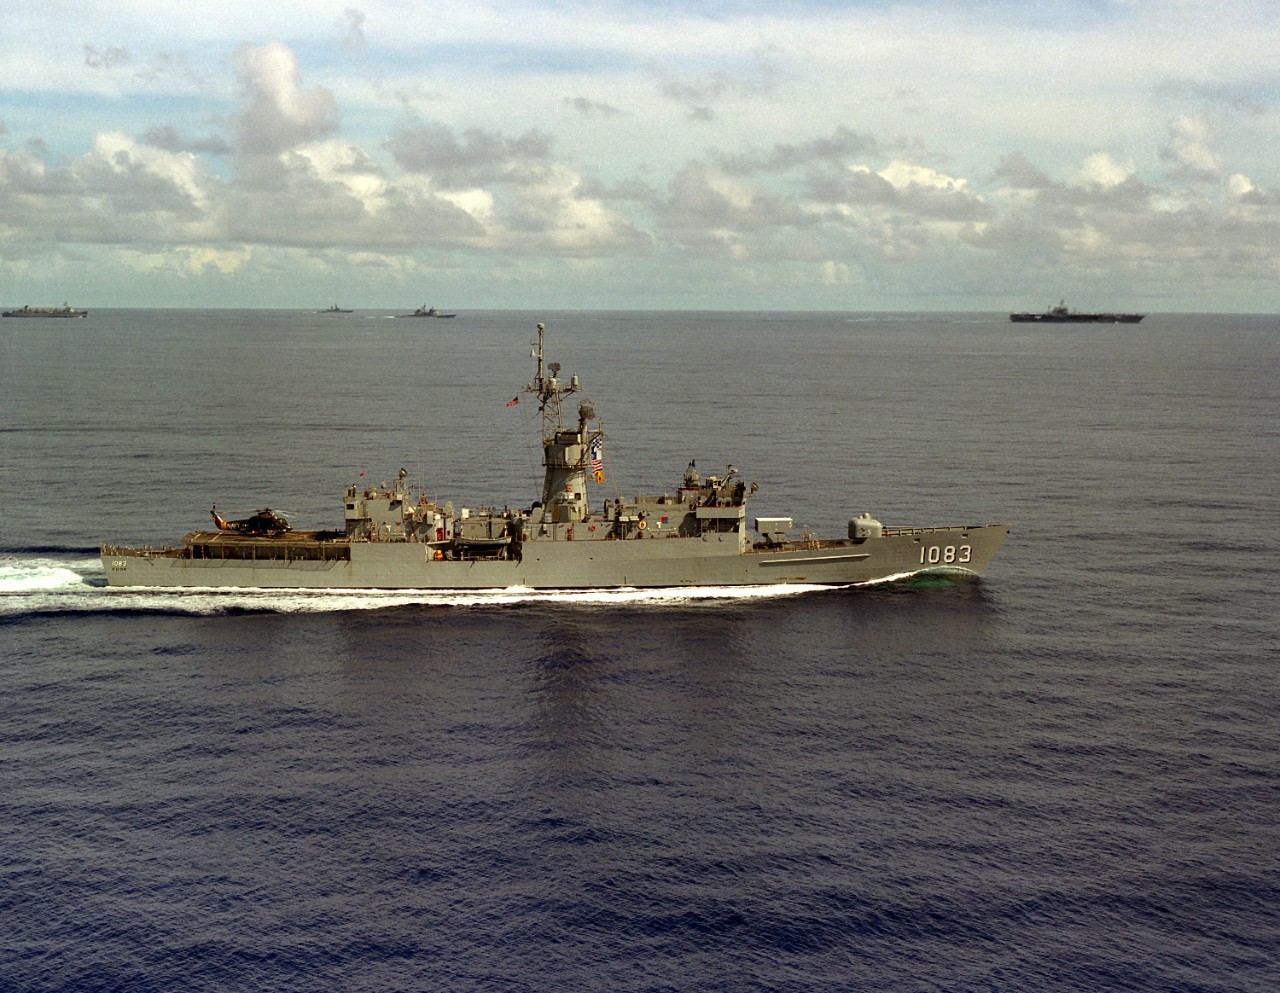 Cook sails as part of Battle Group Delta led by Constellation, 1 August 1987. (U.S. Navy Photo by PH1 Barrett, DIMOC #DN-SC-89-08858)